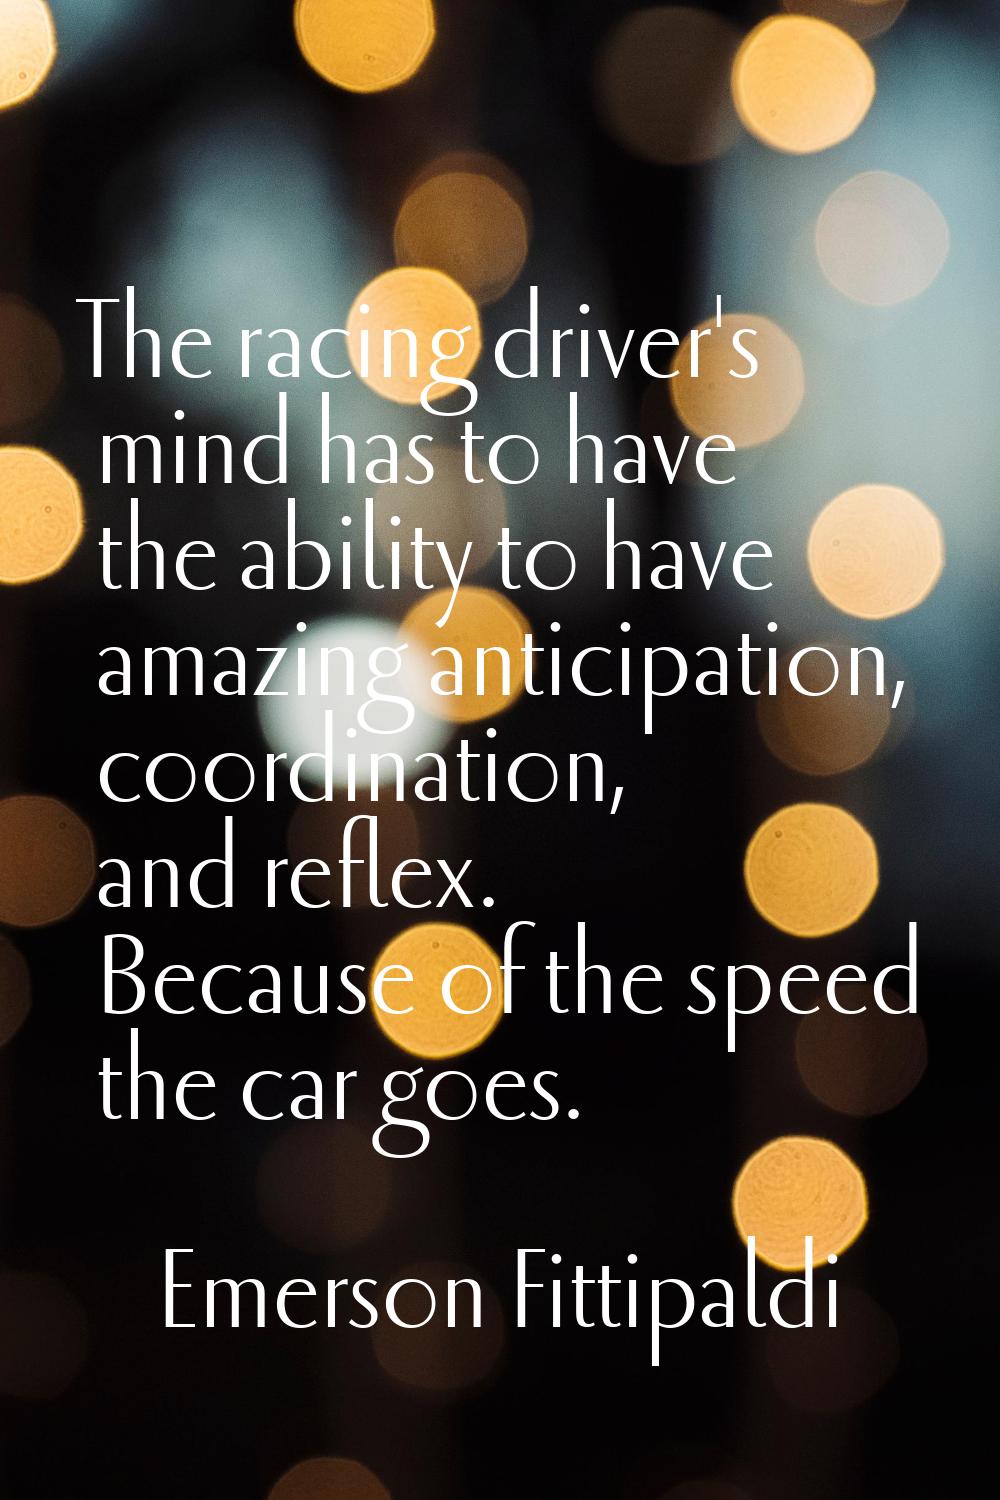 The racing driver's mind has to have the ability to have amazing anticipation, coordination, and re